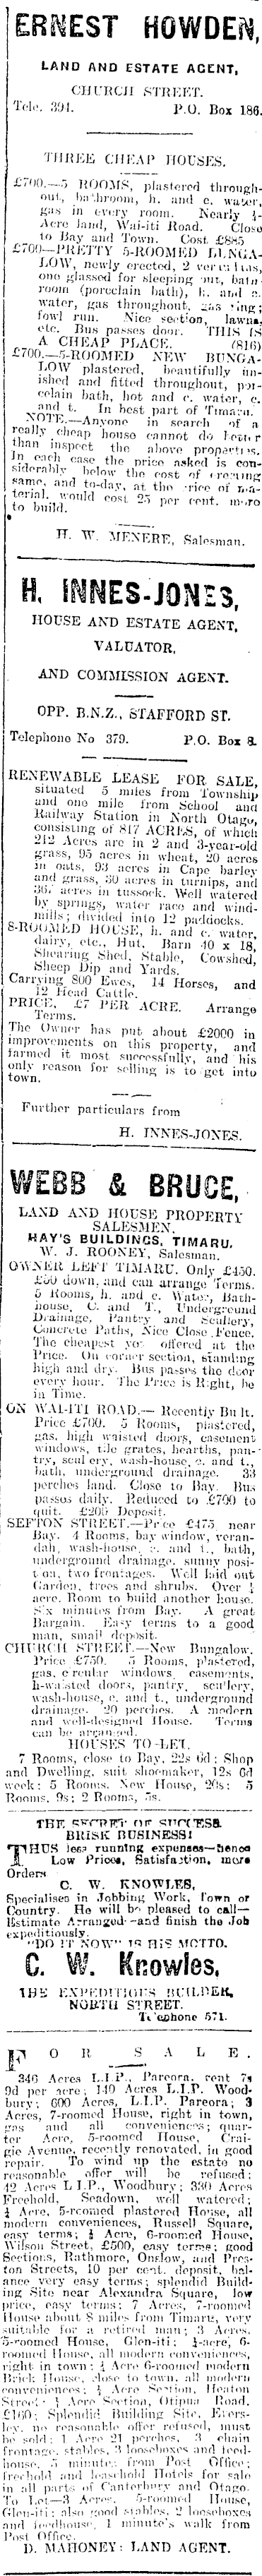 Papers Past Newspapers Timaru Herald 26 June 1916 Page 12 Advertisements Column 8